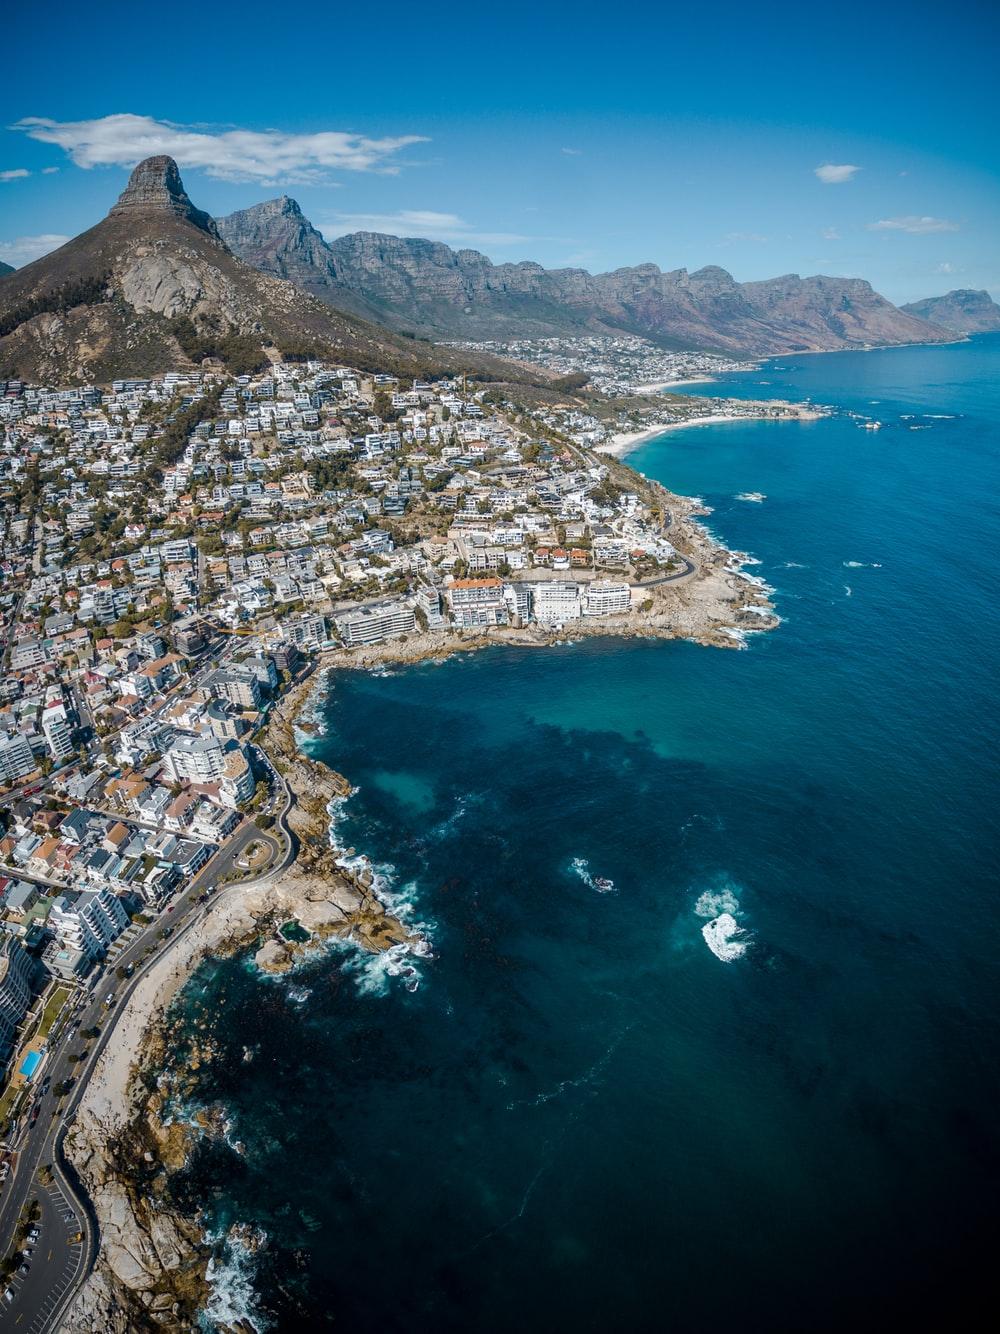 Cape Town Picture [Stunning!]. Download Free Image